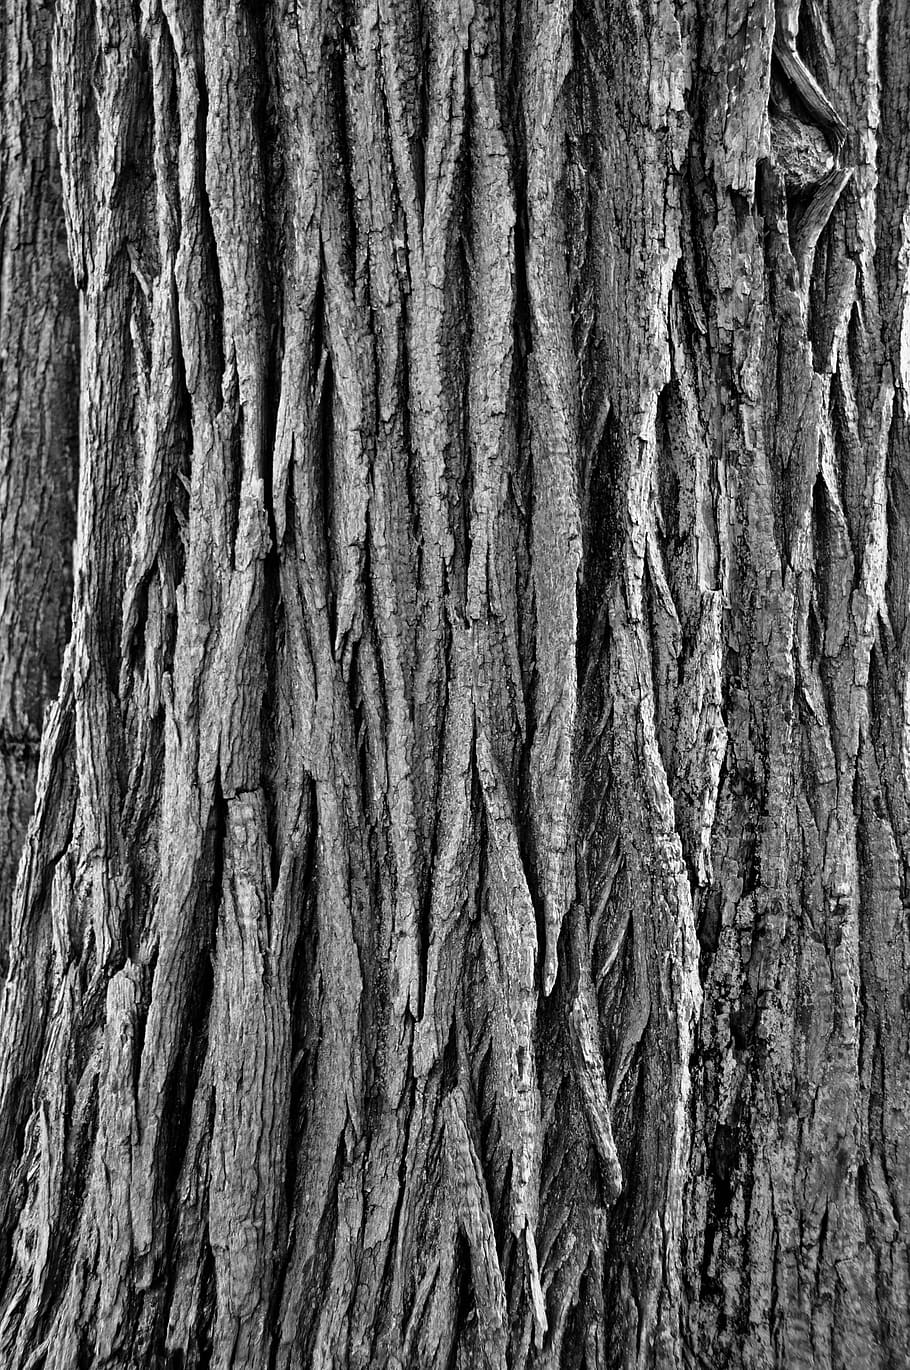 tree bark, pattern, rough, nature, forest, wood, woods, grain, cracked, surface